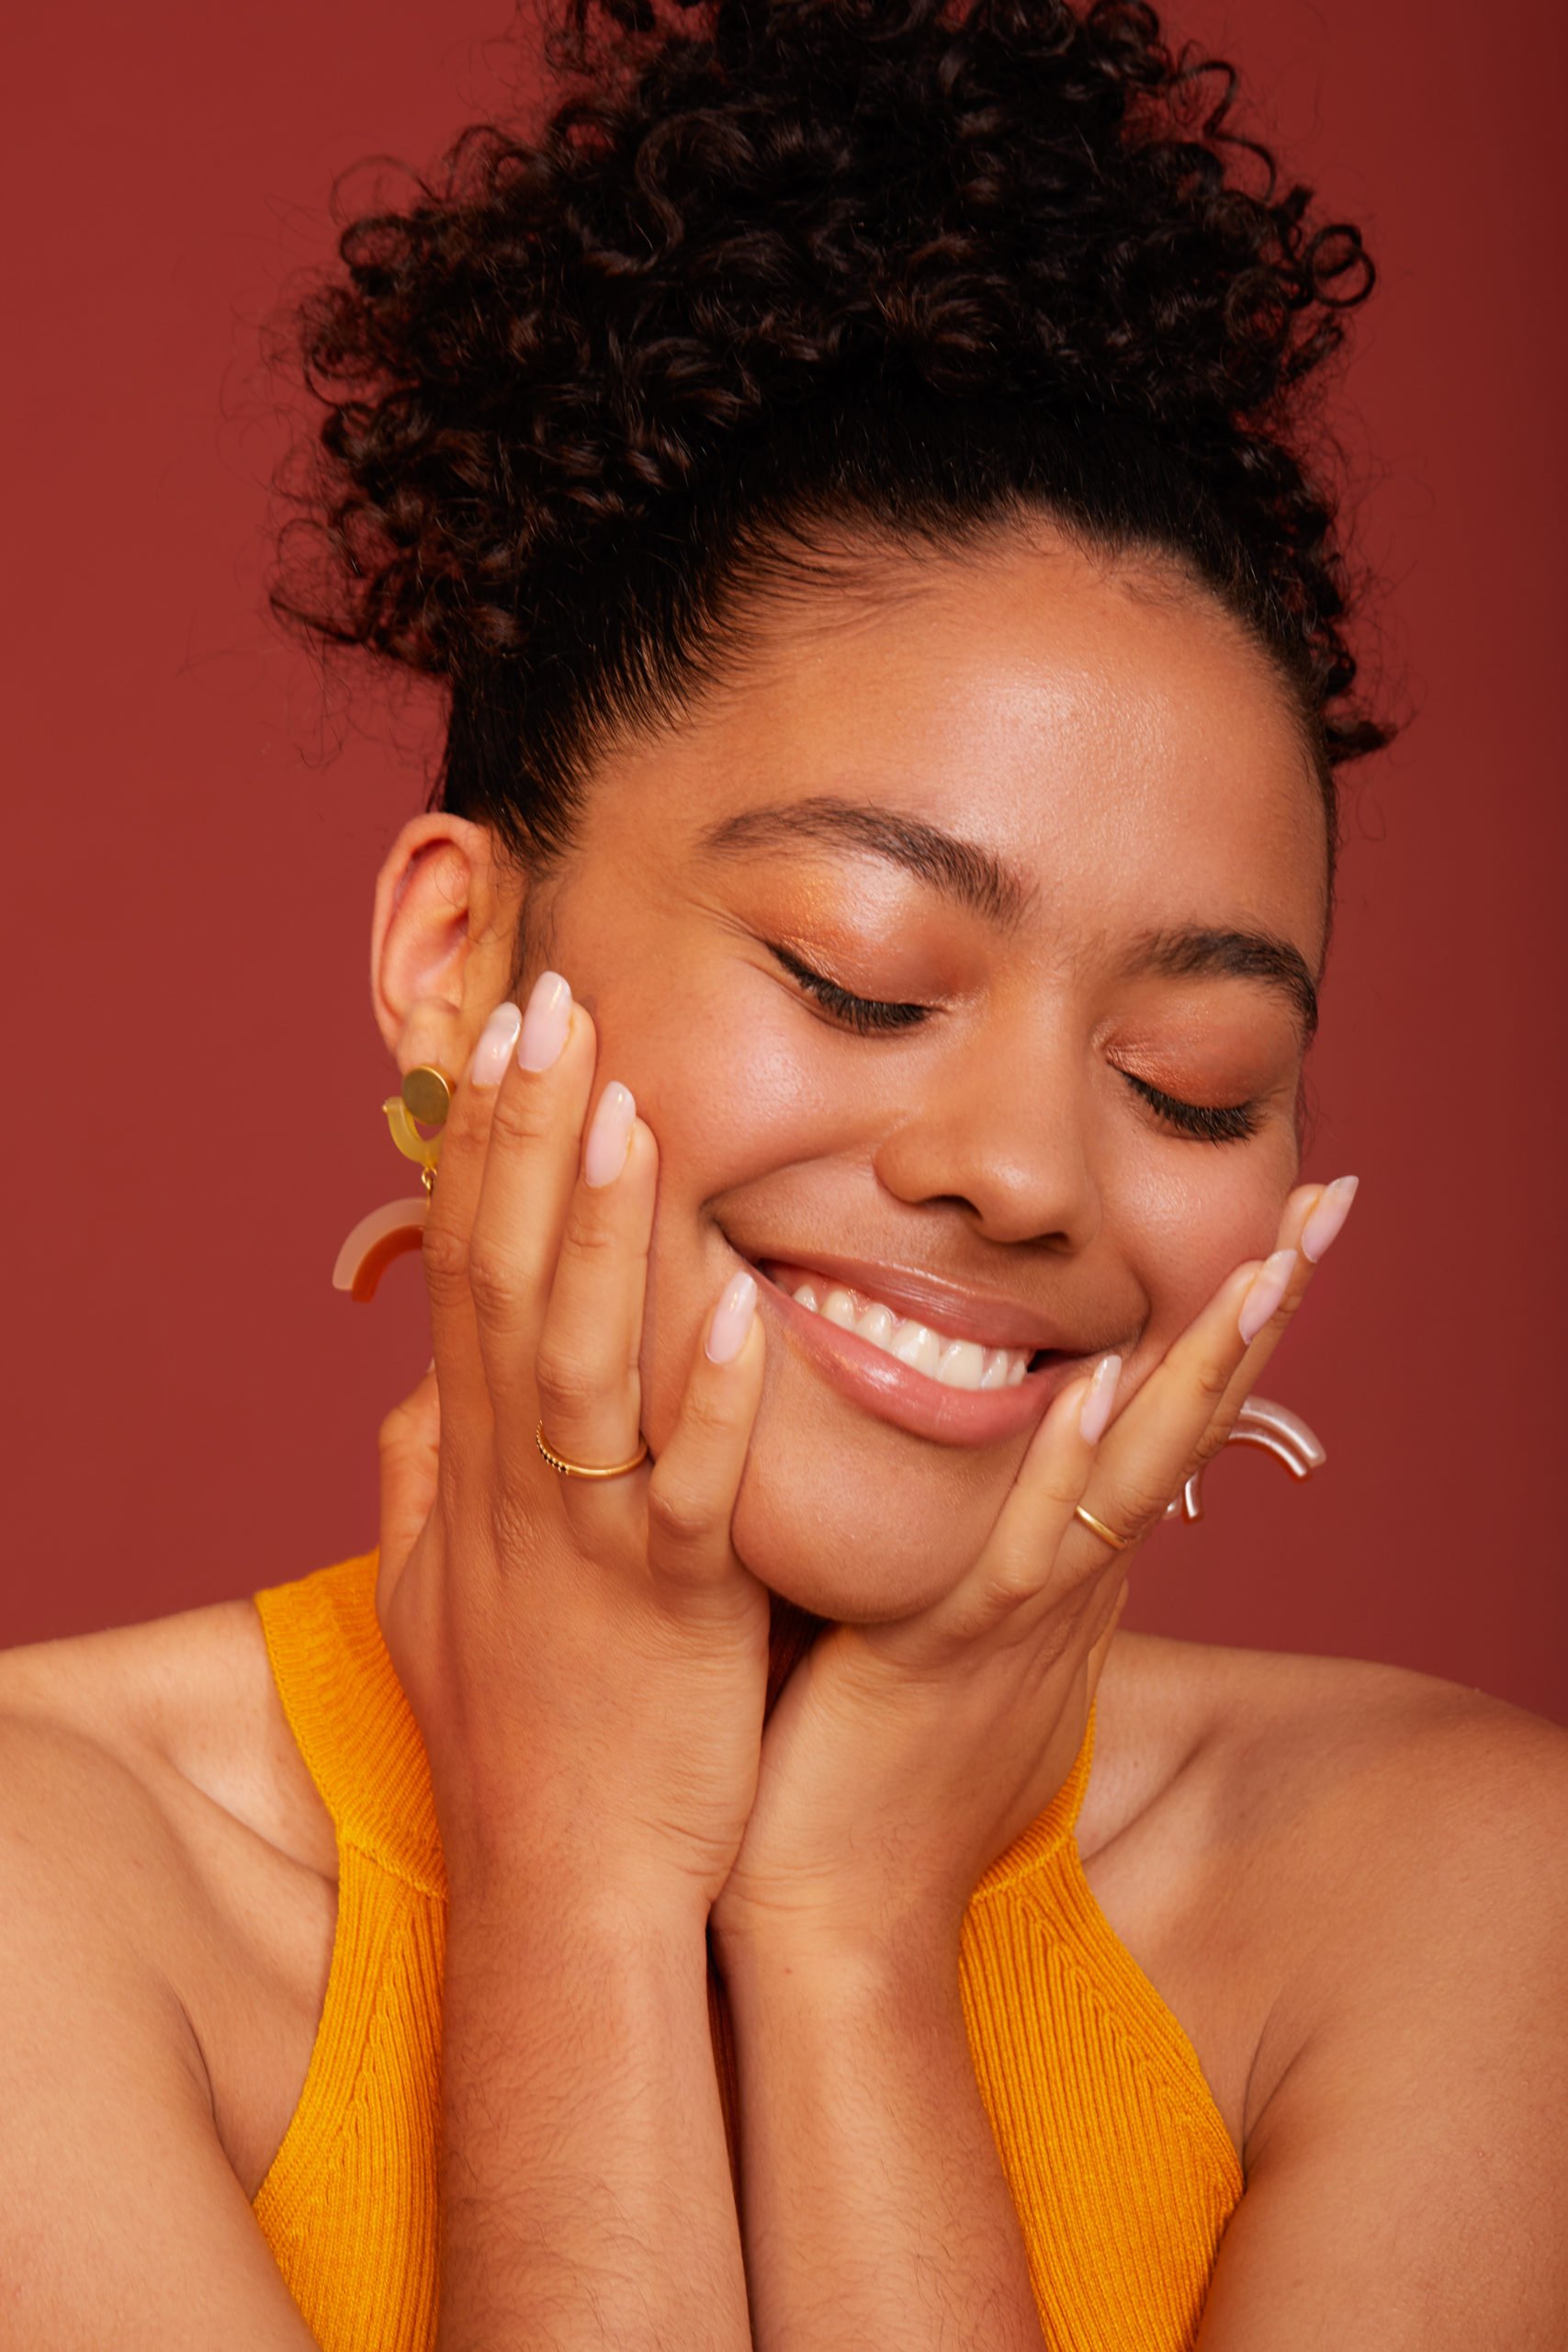 Got Dry Skin? These Natural Ingredients Will Do The Trick